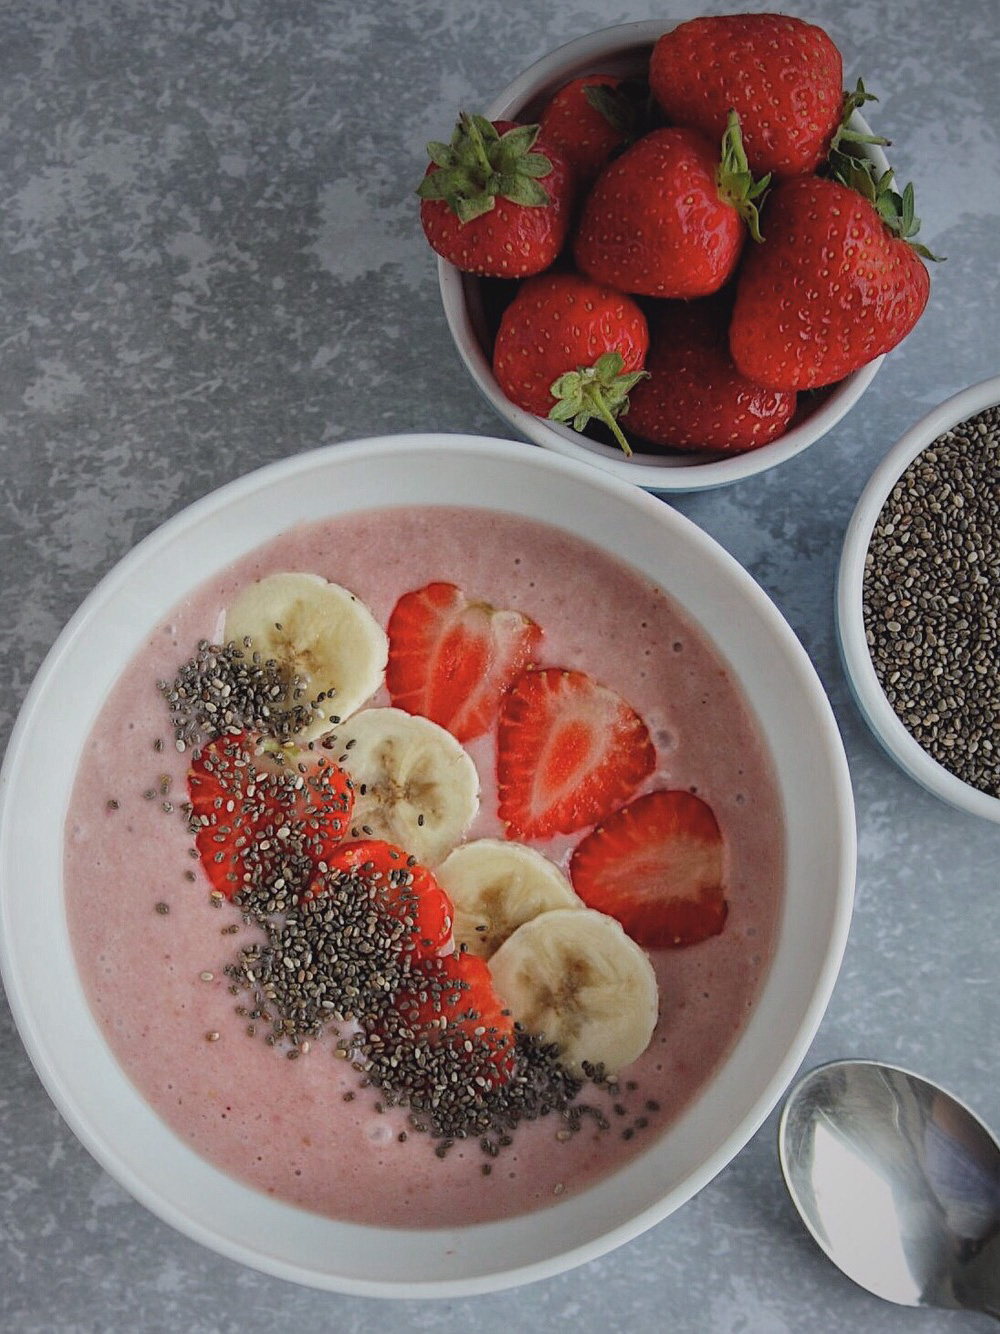 Strawberry bowl smoothie recipe by Keencuisinier